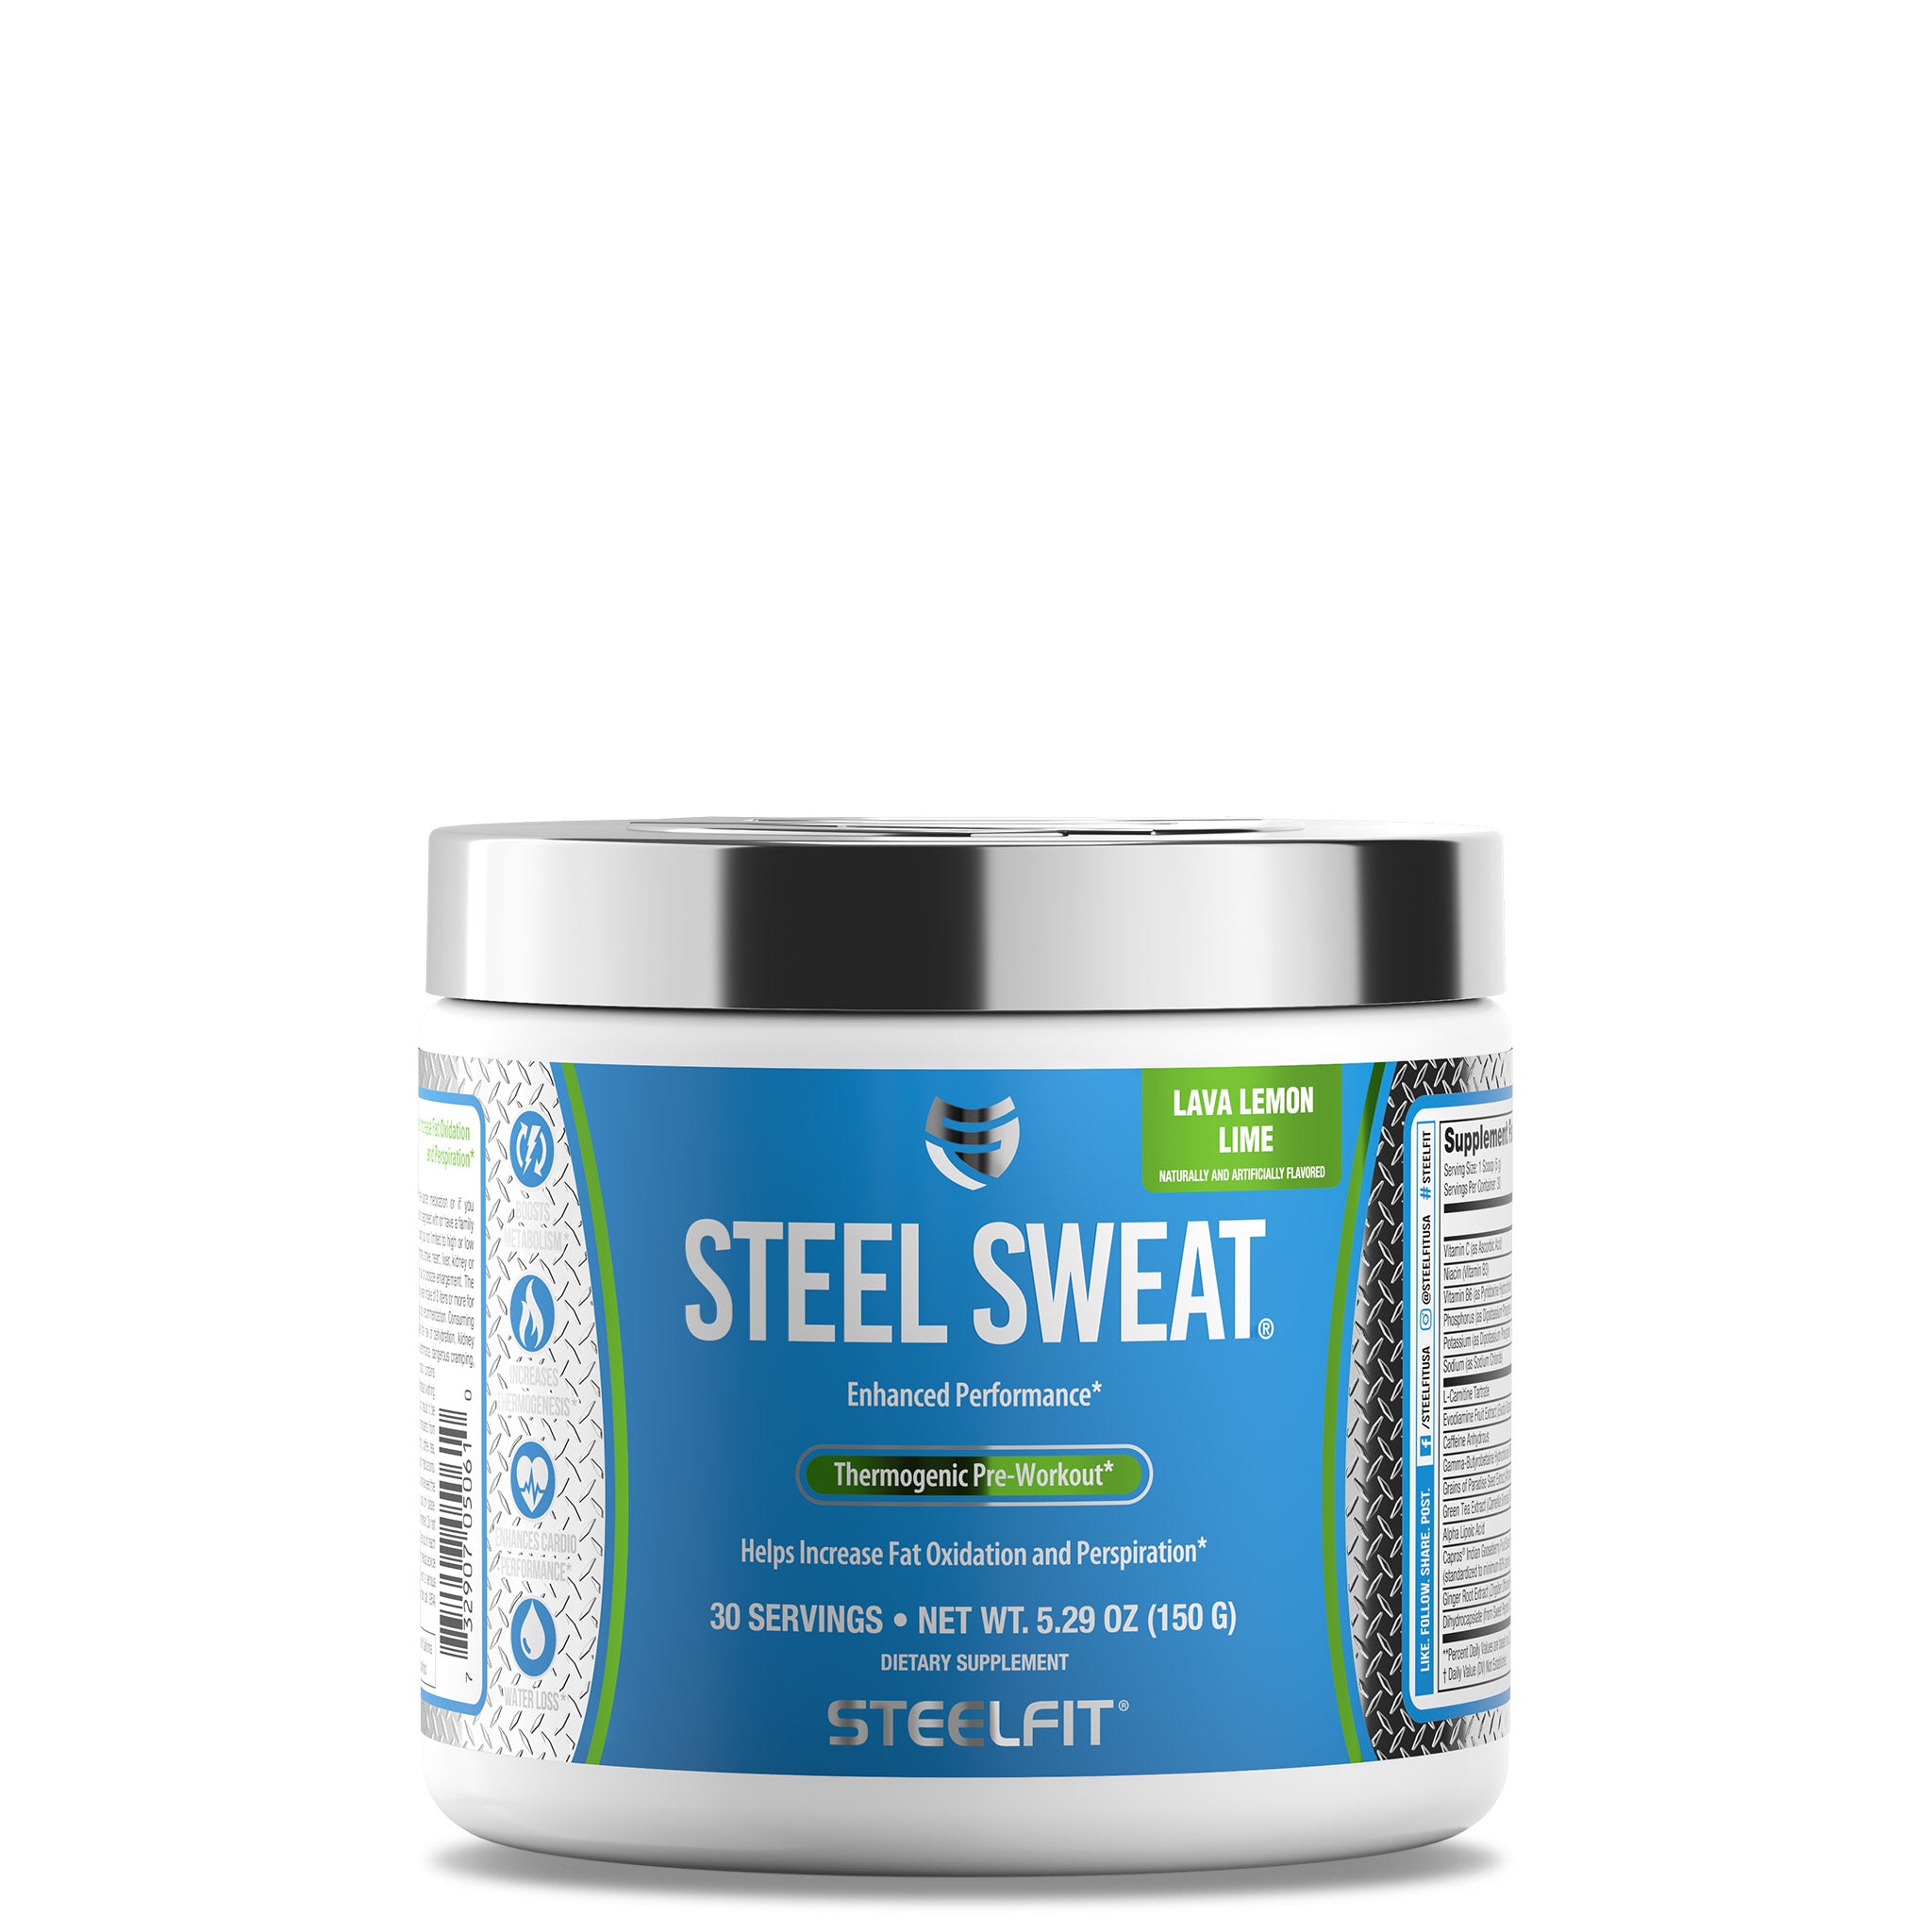 Lava Lemon & Lime thermogenic pre workout supplement by SteelFit